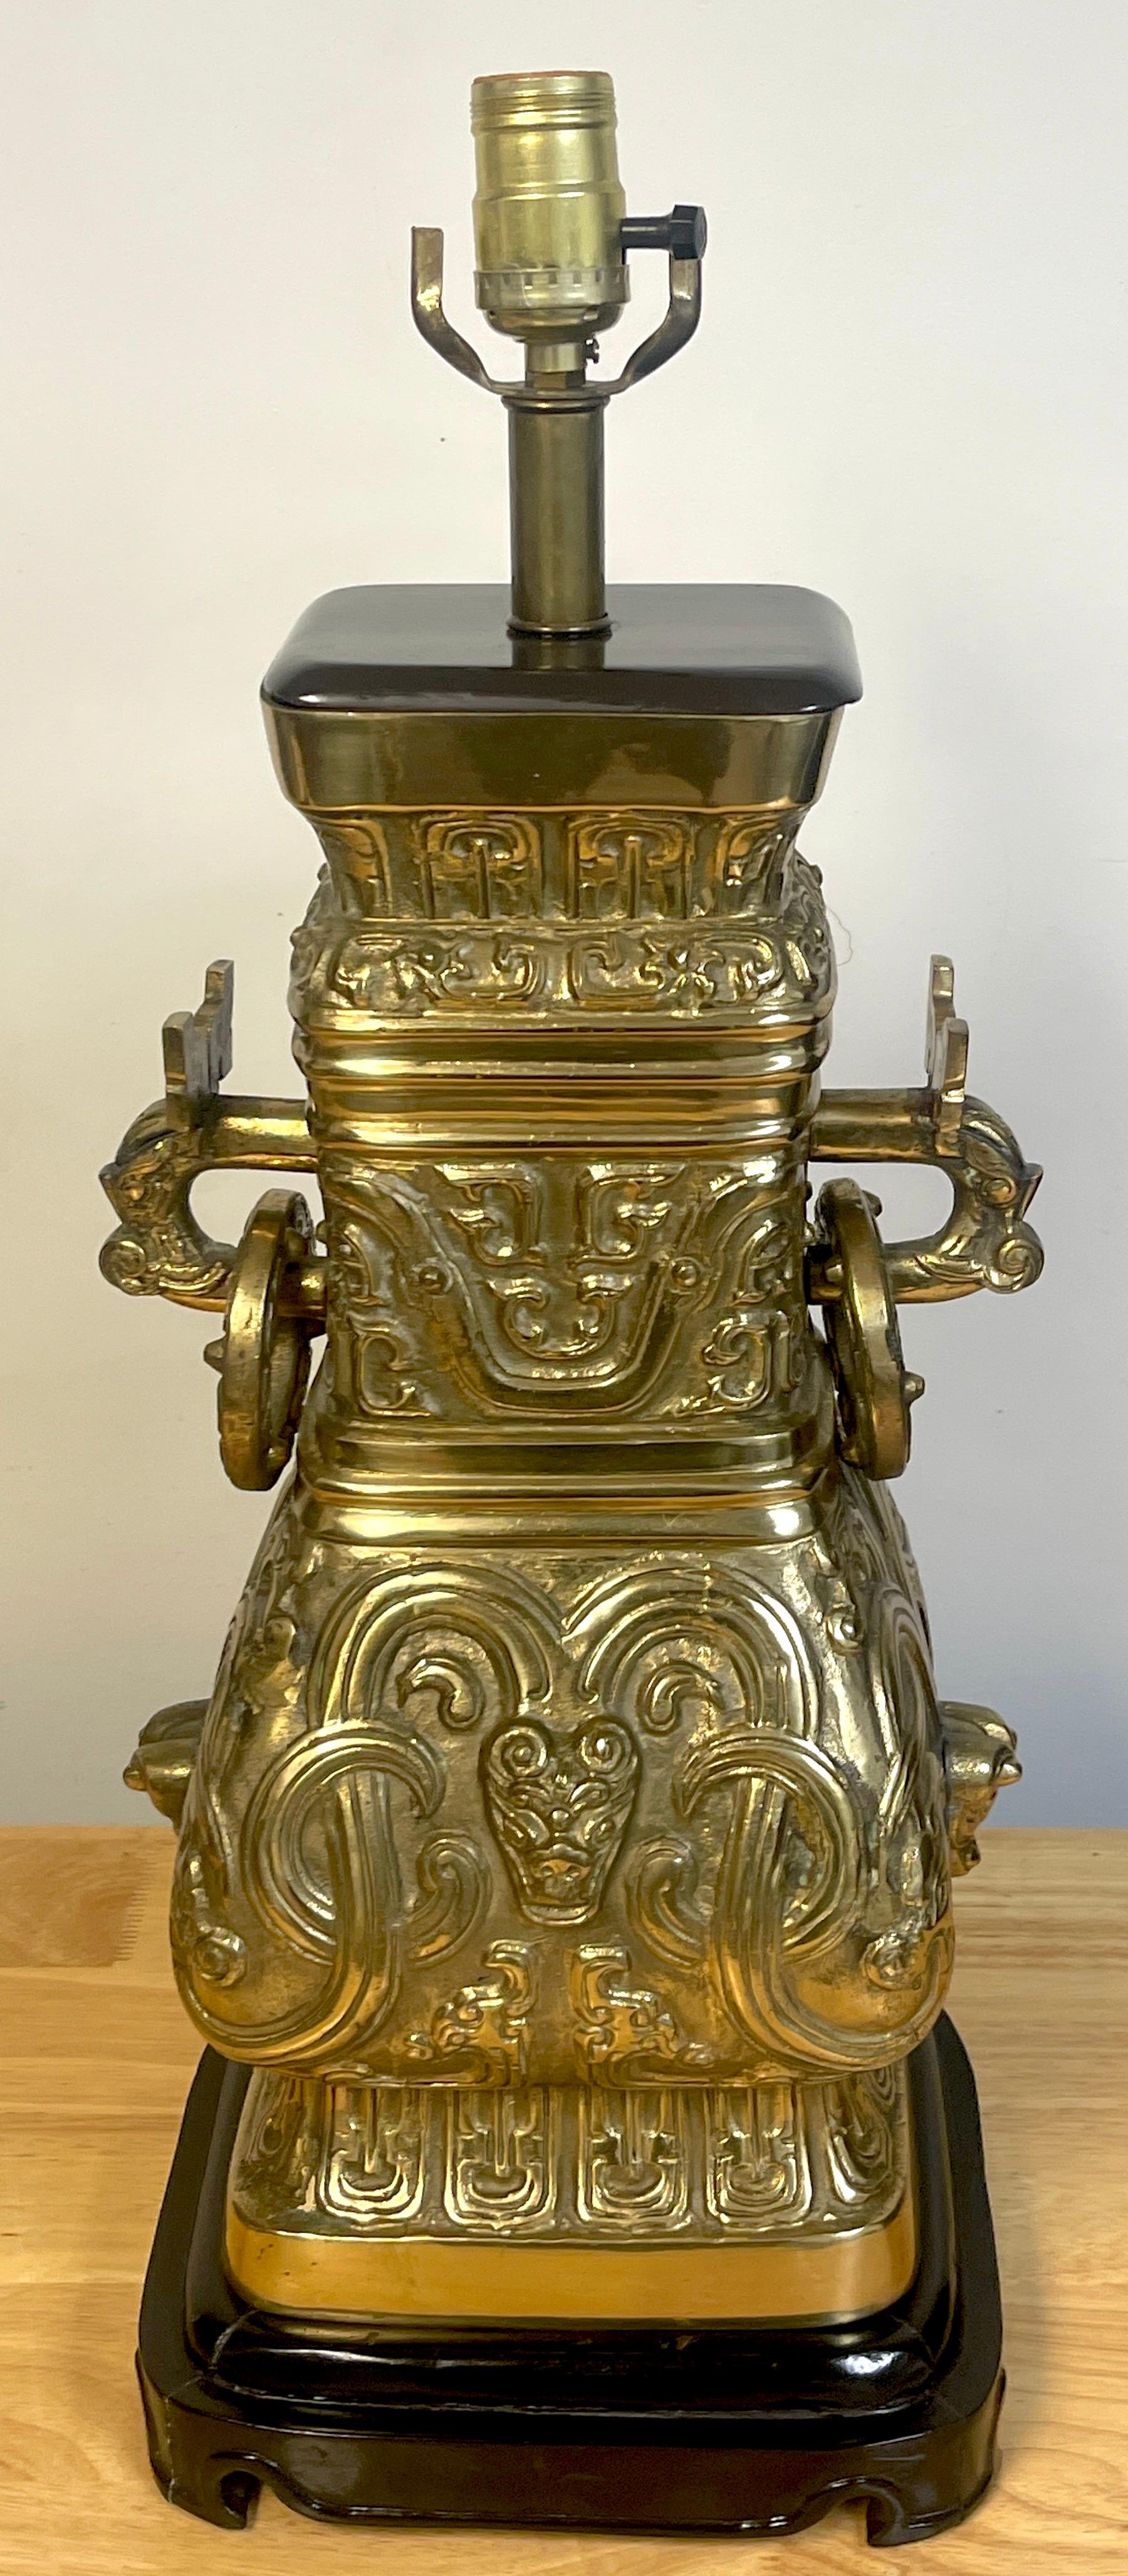 James Mont style brass Chinese wine vessel (Hu) vase, Now as a Lamp, of good size and weight, beautiful casting, with custom wood mounts. Measures: 19